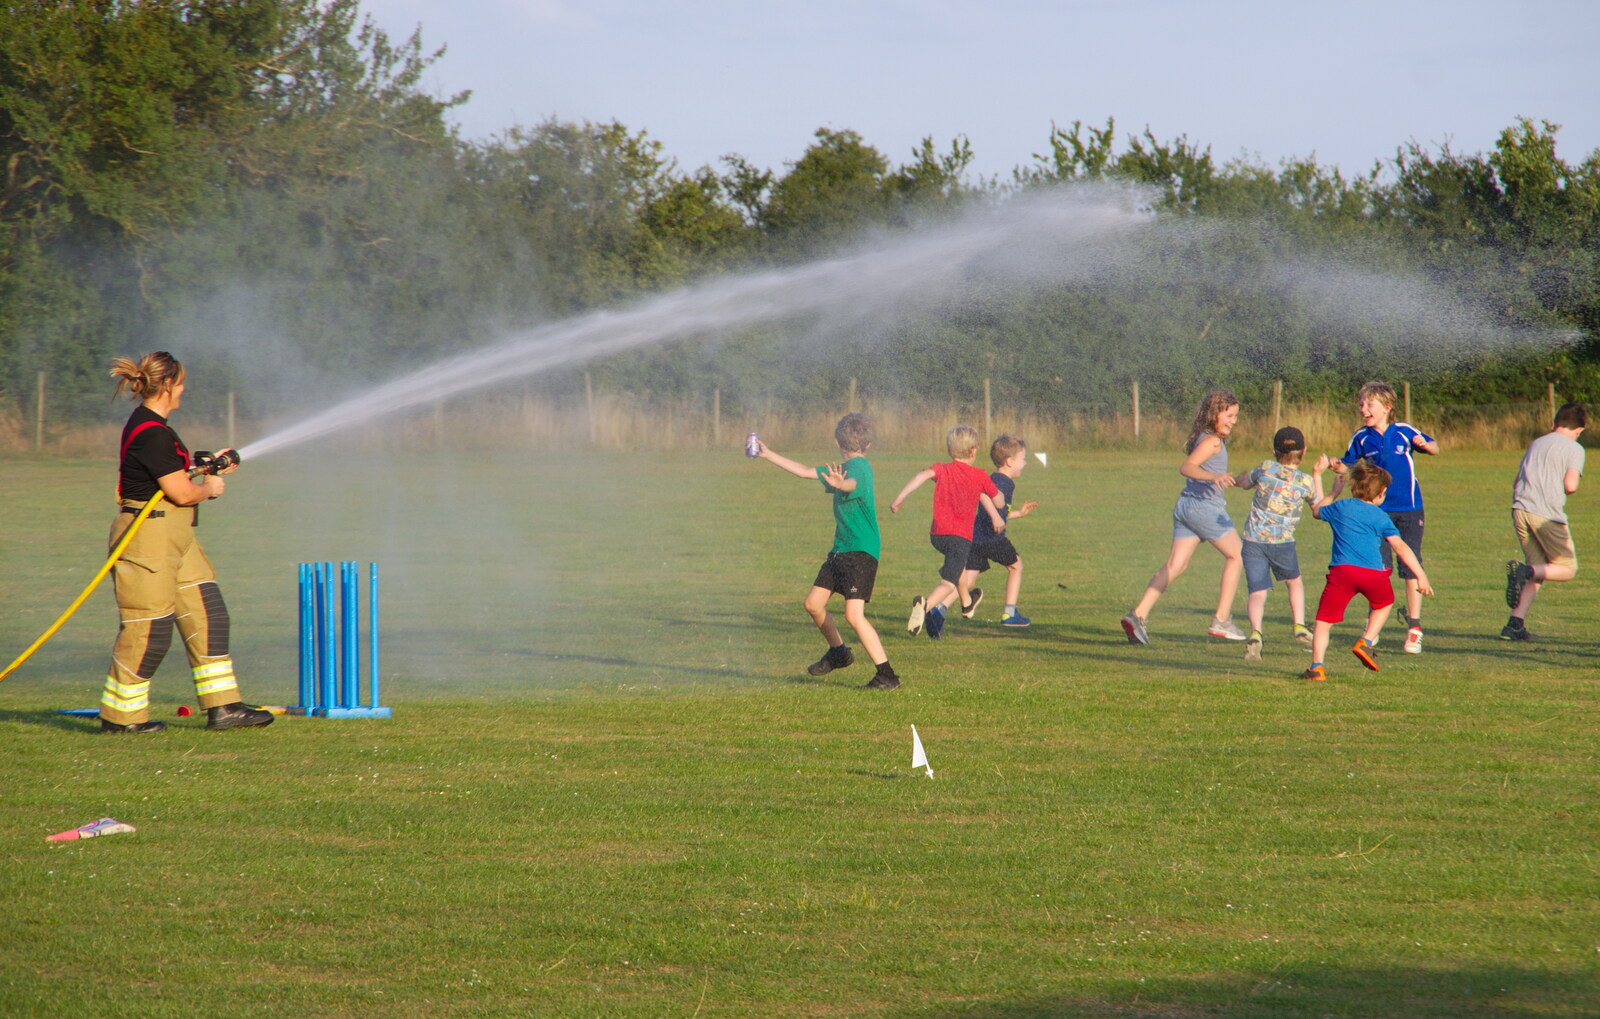 The hose is unleashed from A Water Fight with a Fire Engine, Eye Cricket Club, Suffolk - 5th August 2019